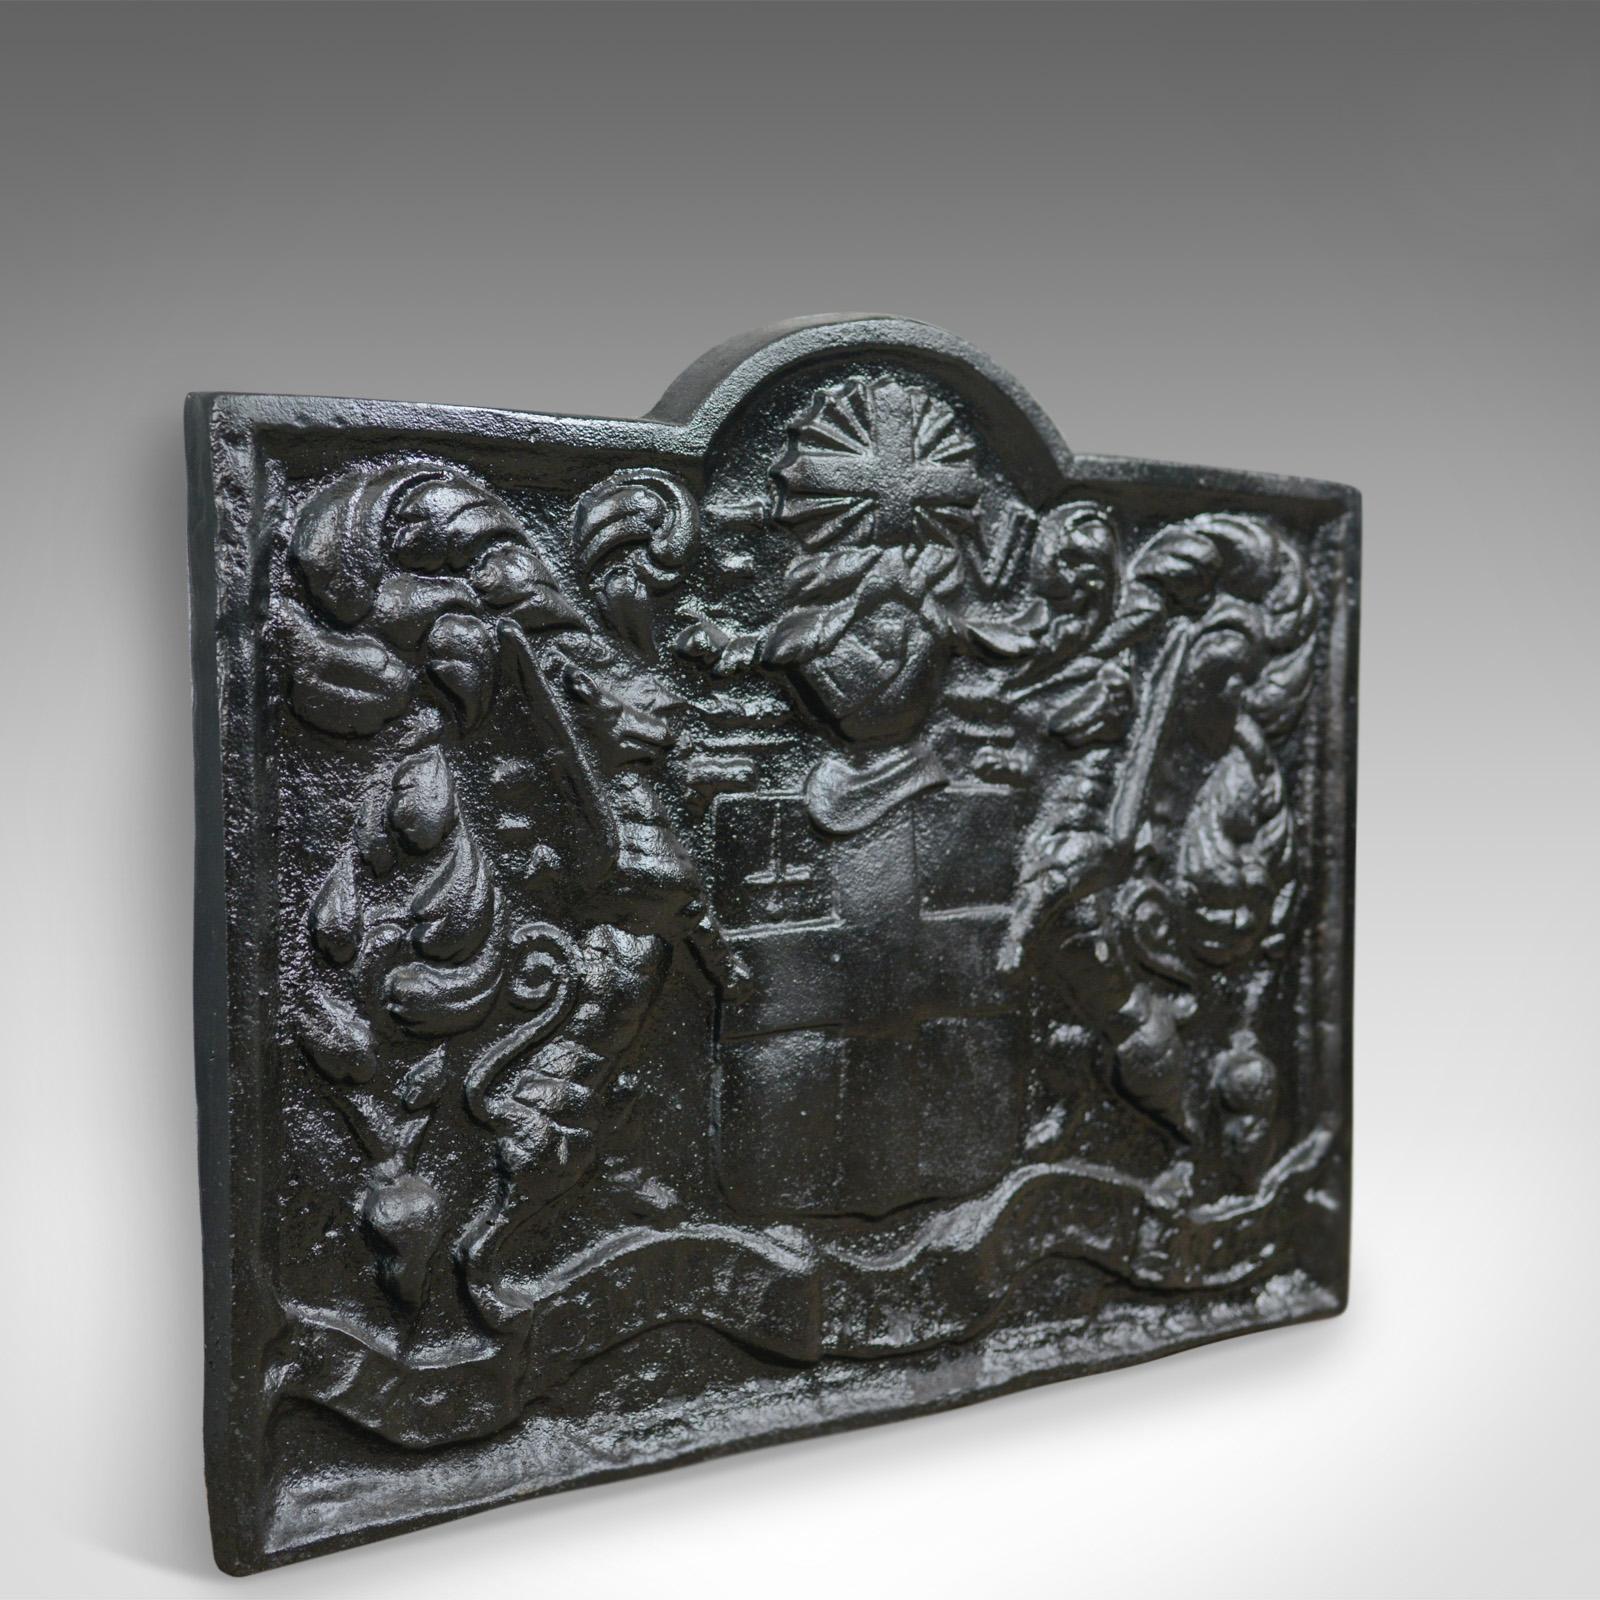 This is a cast iron fire back from the early 20th century displaying a coat of arms.

Heavy fire back in cast iron with a blackened finish
Shaped top over oblong plate
Casting of the coat of arms supported by beasts
Crest with cross and